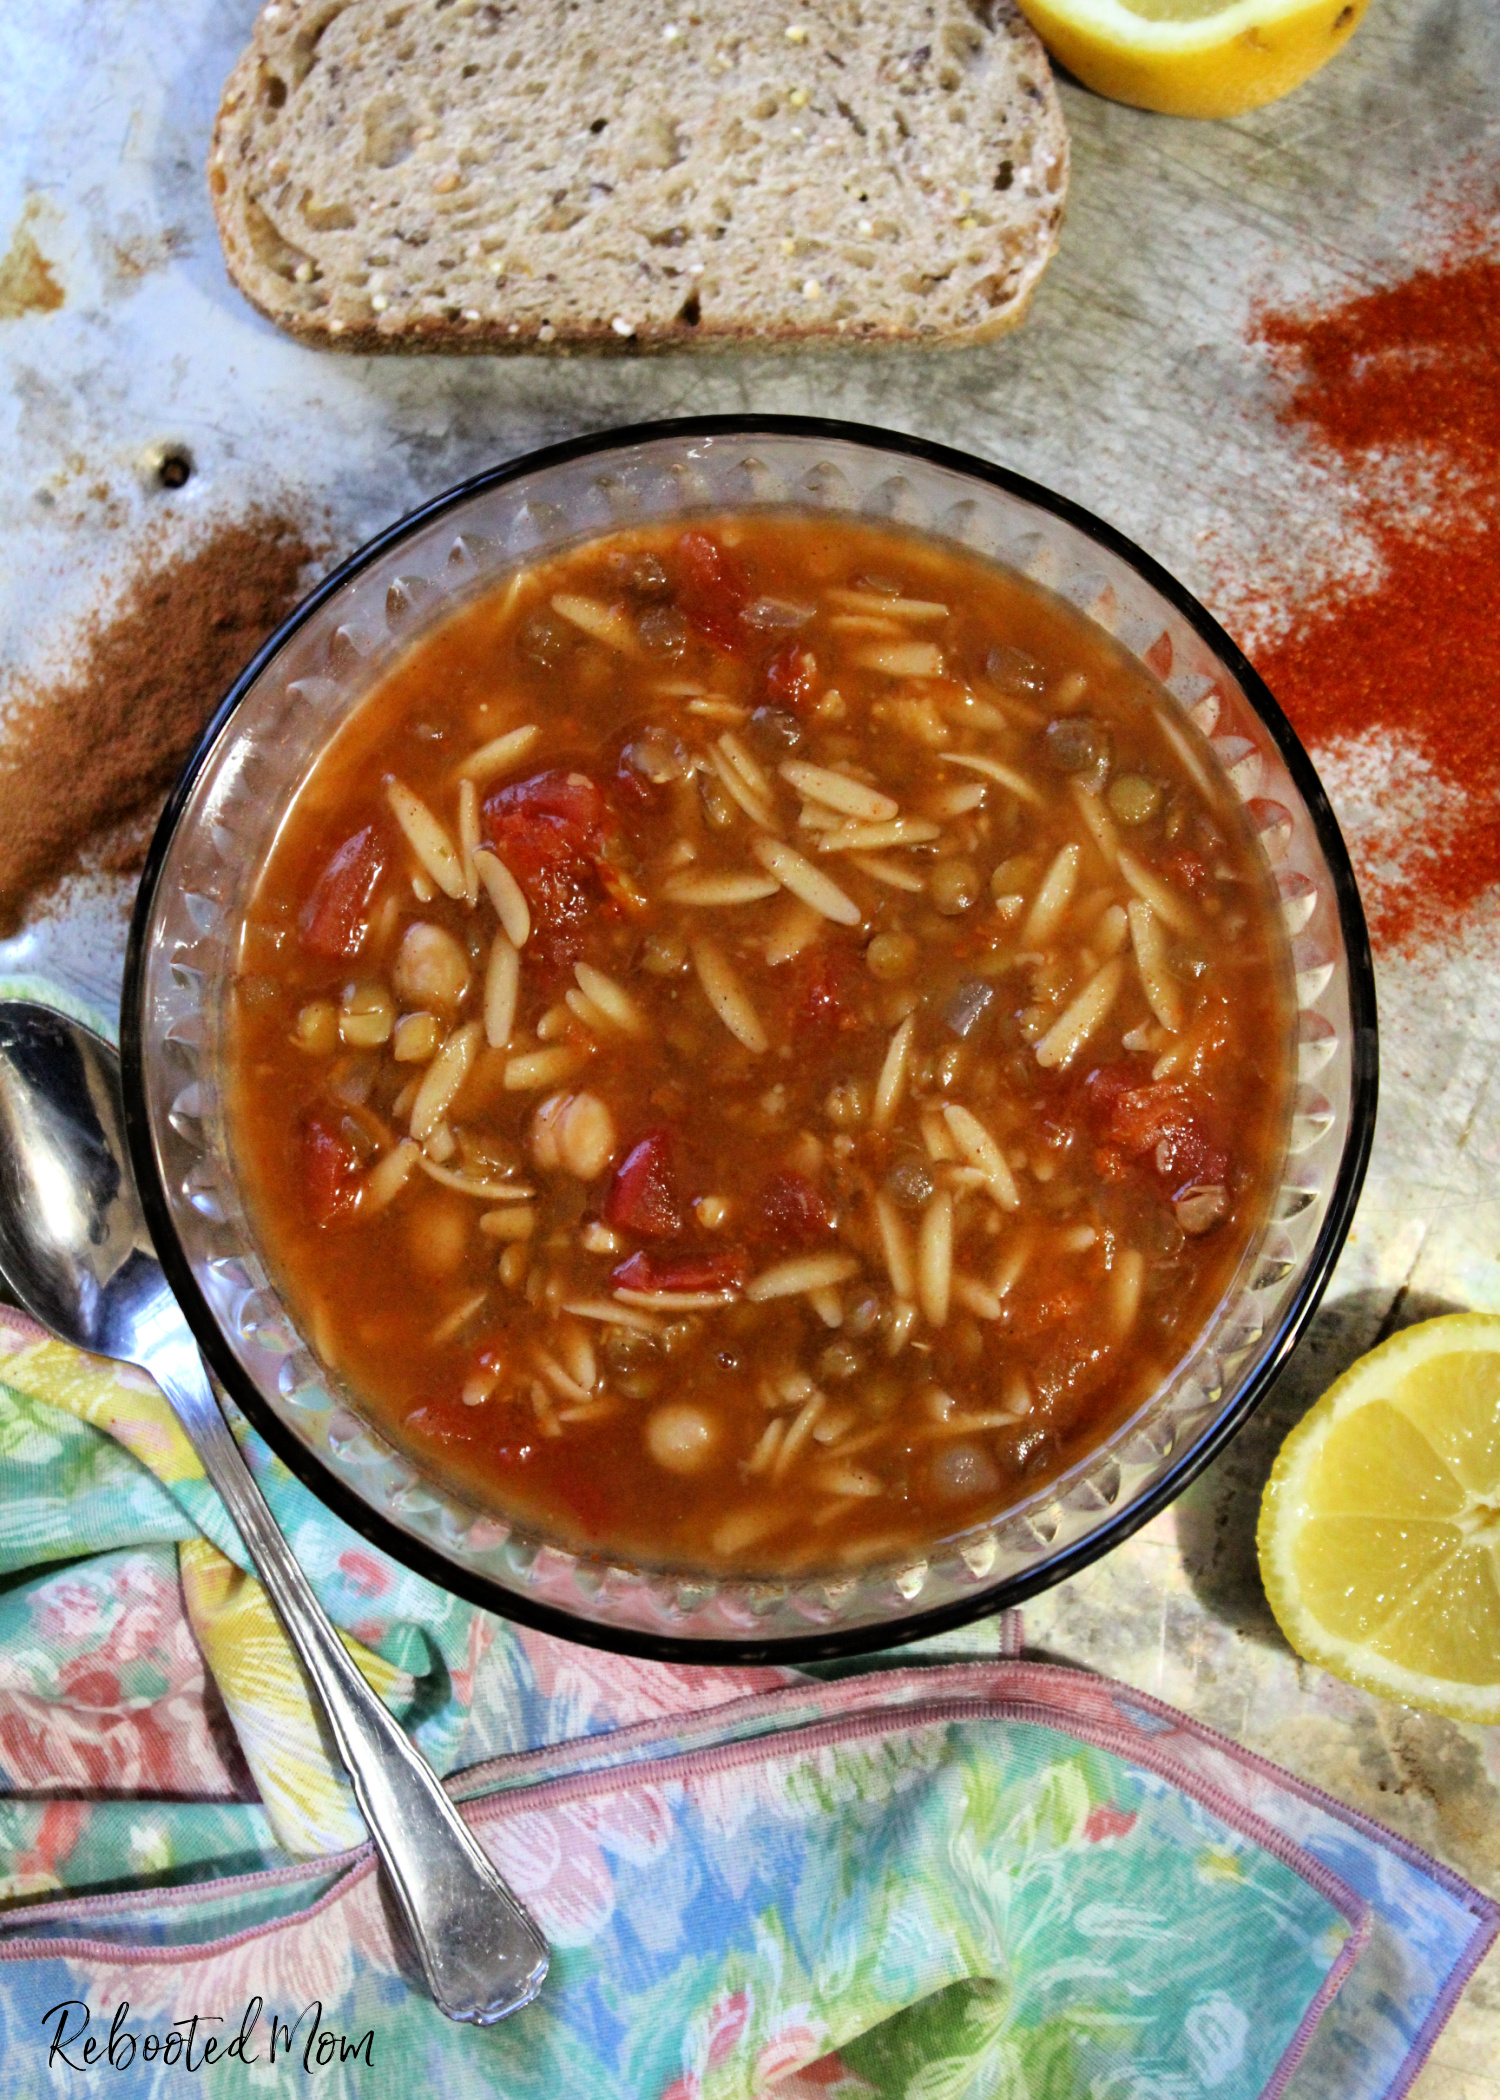 Harira (Moroccan Lentil and Chickpea Soup) is a simple, affordable and delicious meal that uses pantry staples - the entire family will fall in love!